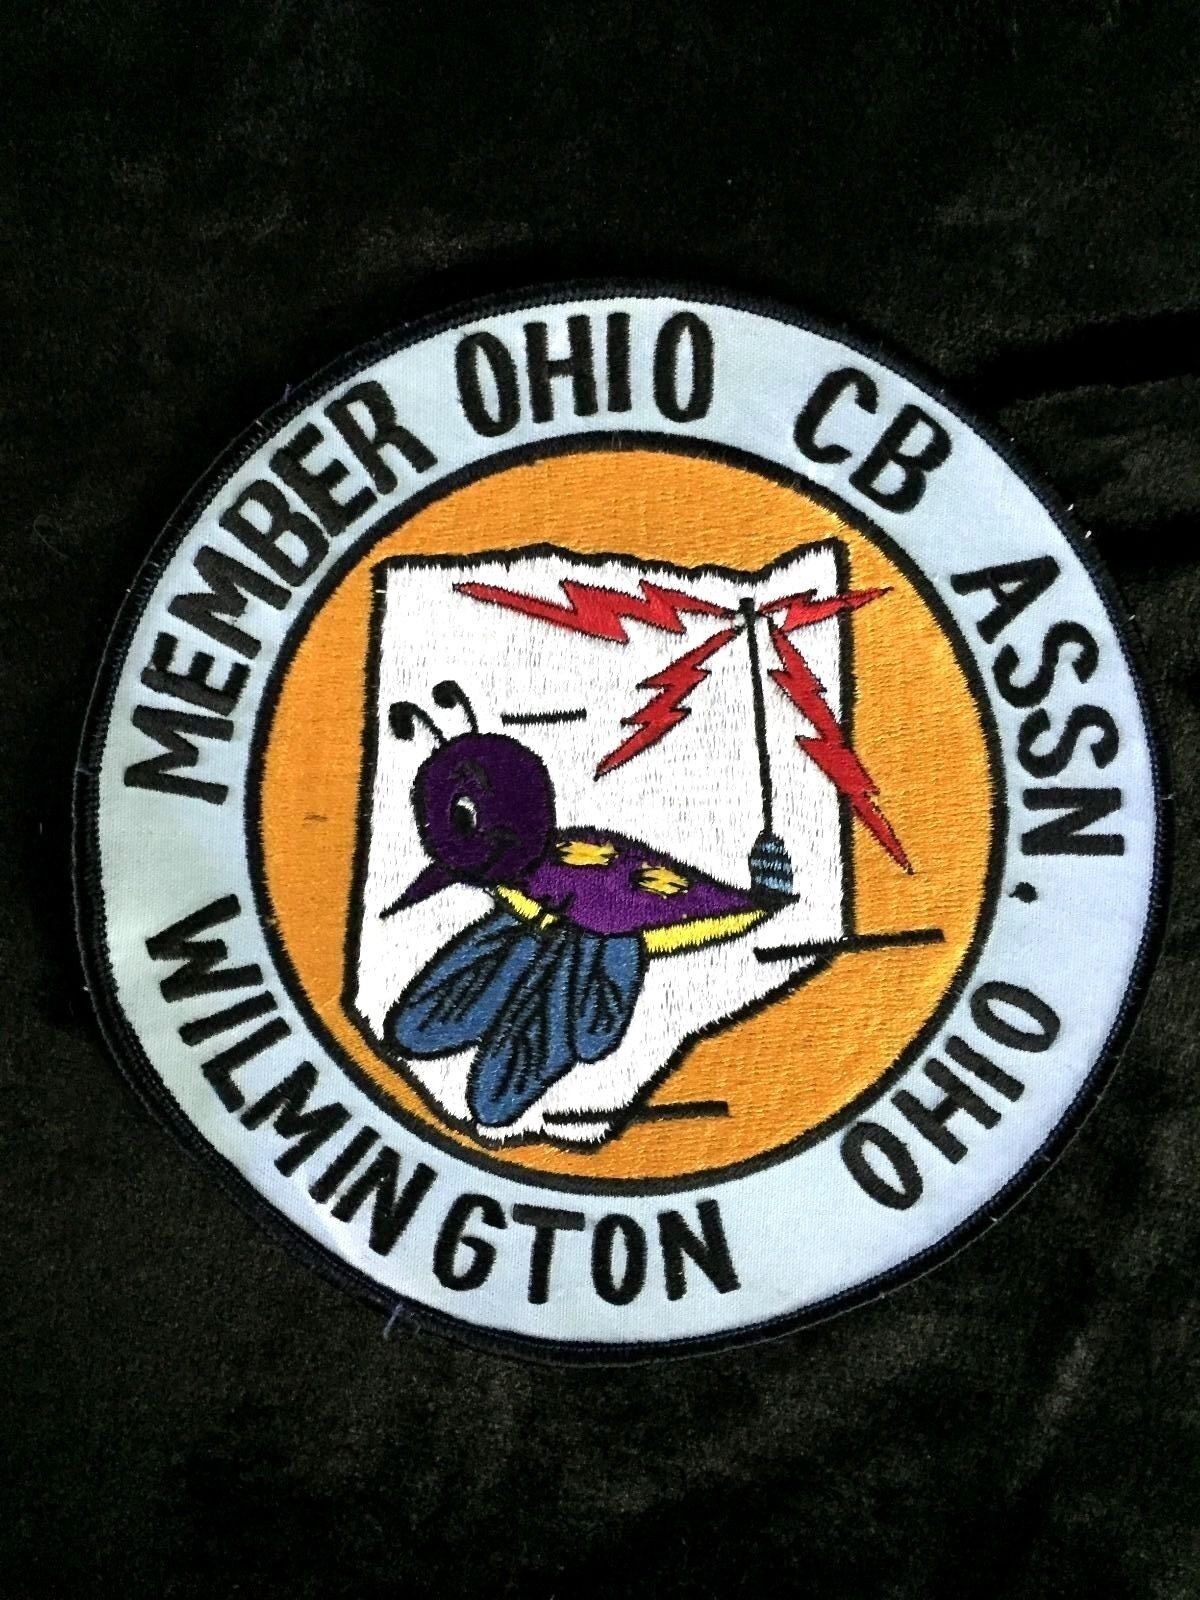 Vintage Wilmington OHIO CB ASSN. LARGE PATCH Citizens Band Radio Collectable NOS